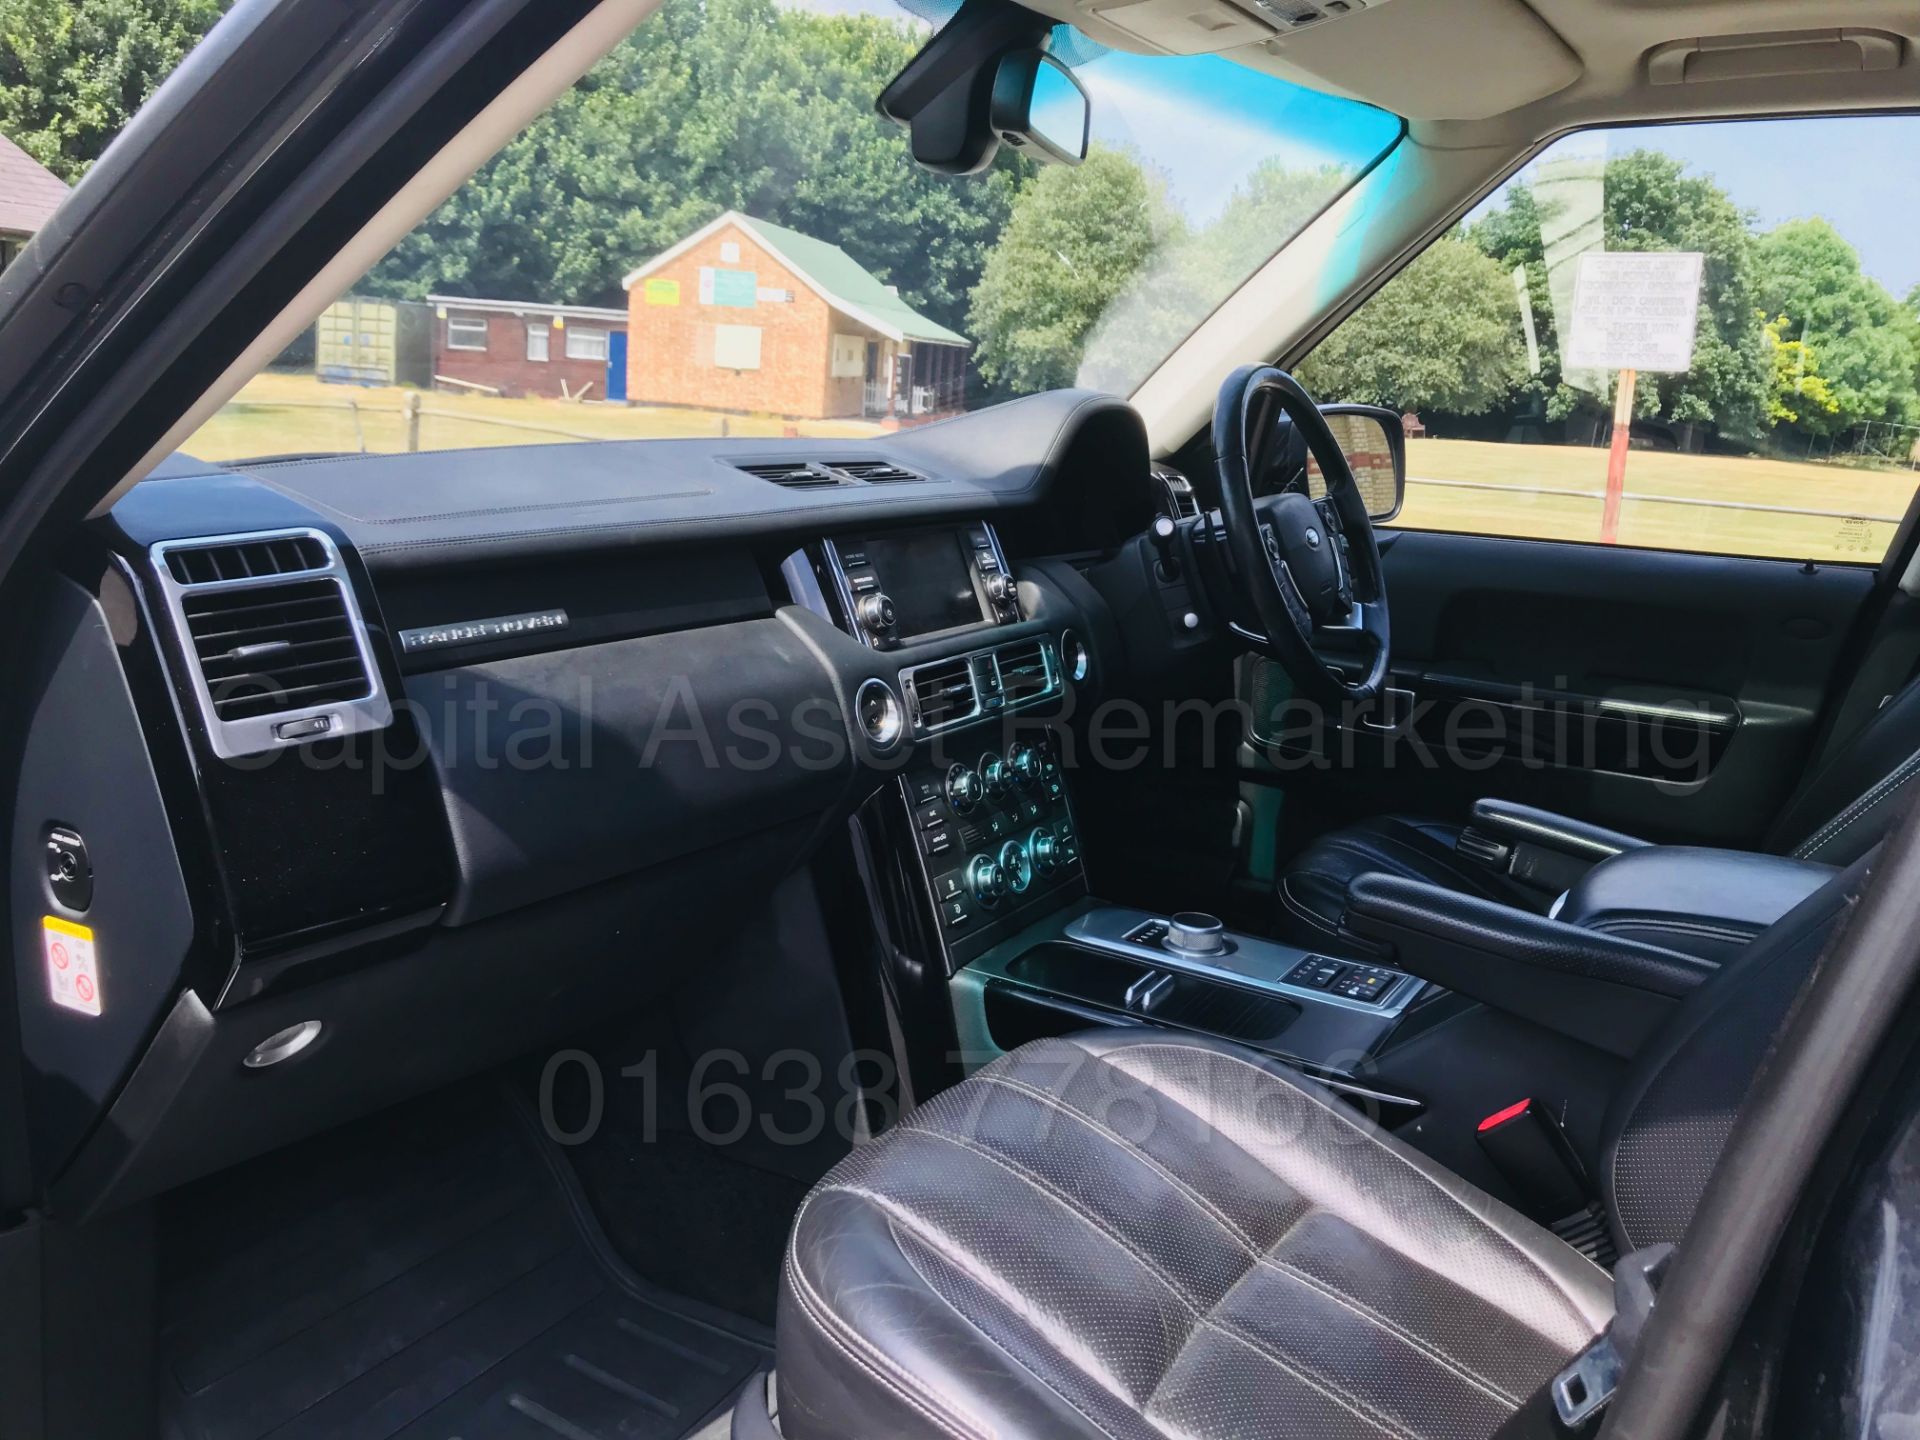 (On Sale) RANGE ROVER VOGUE SE (2011) 'TDV8 -8 SPEED AUTO' **FULLY LOADED** (1 OWNER - FULL HISTORY) - Image 24 of 60